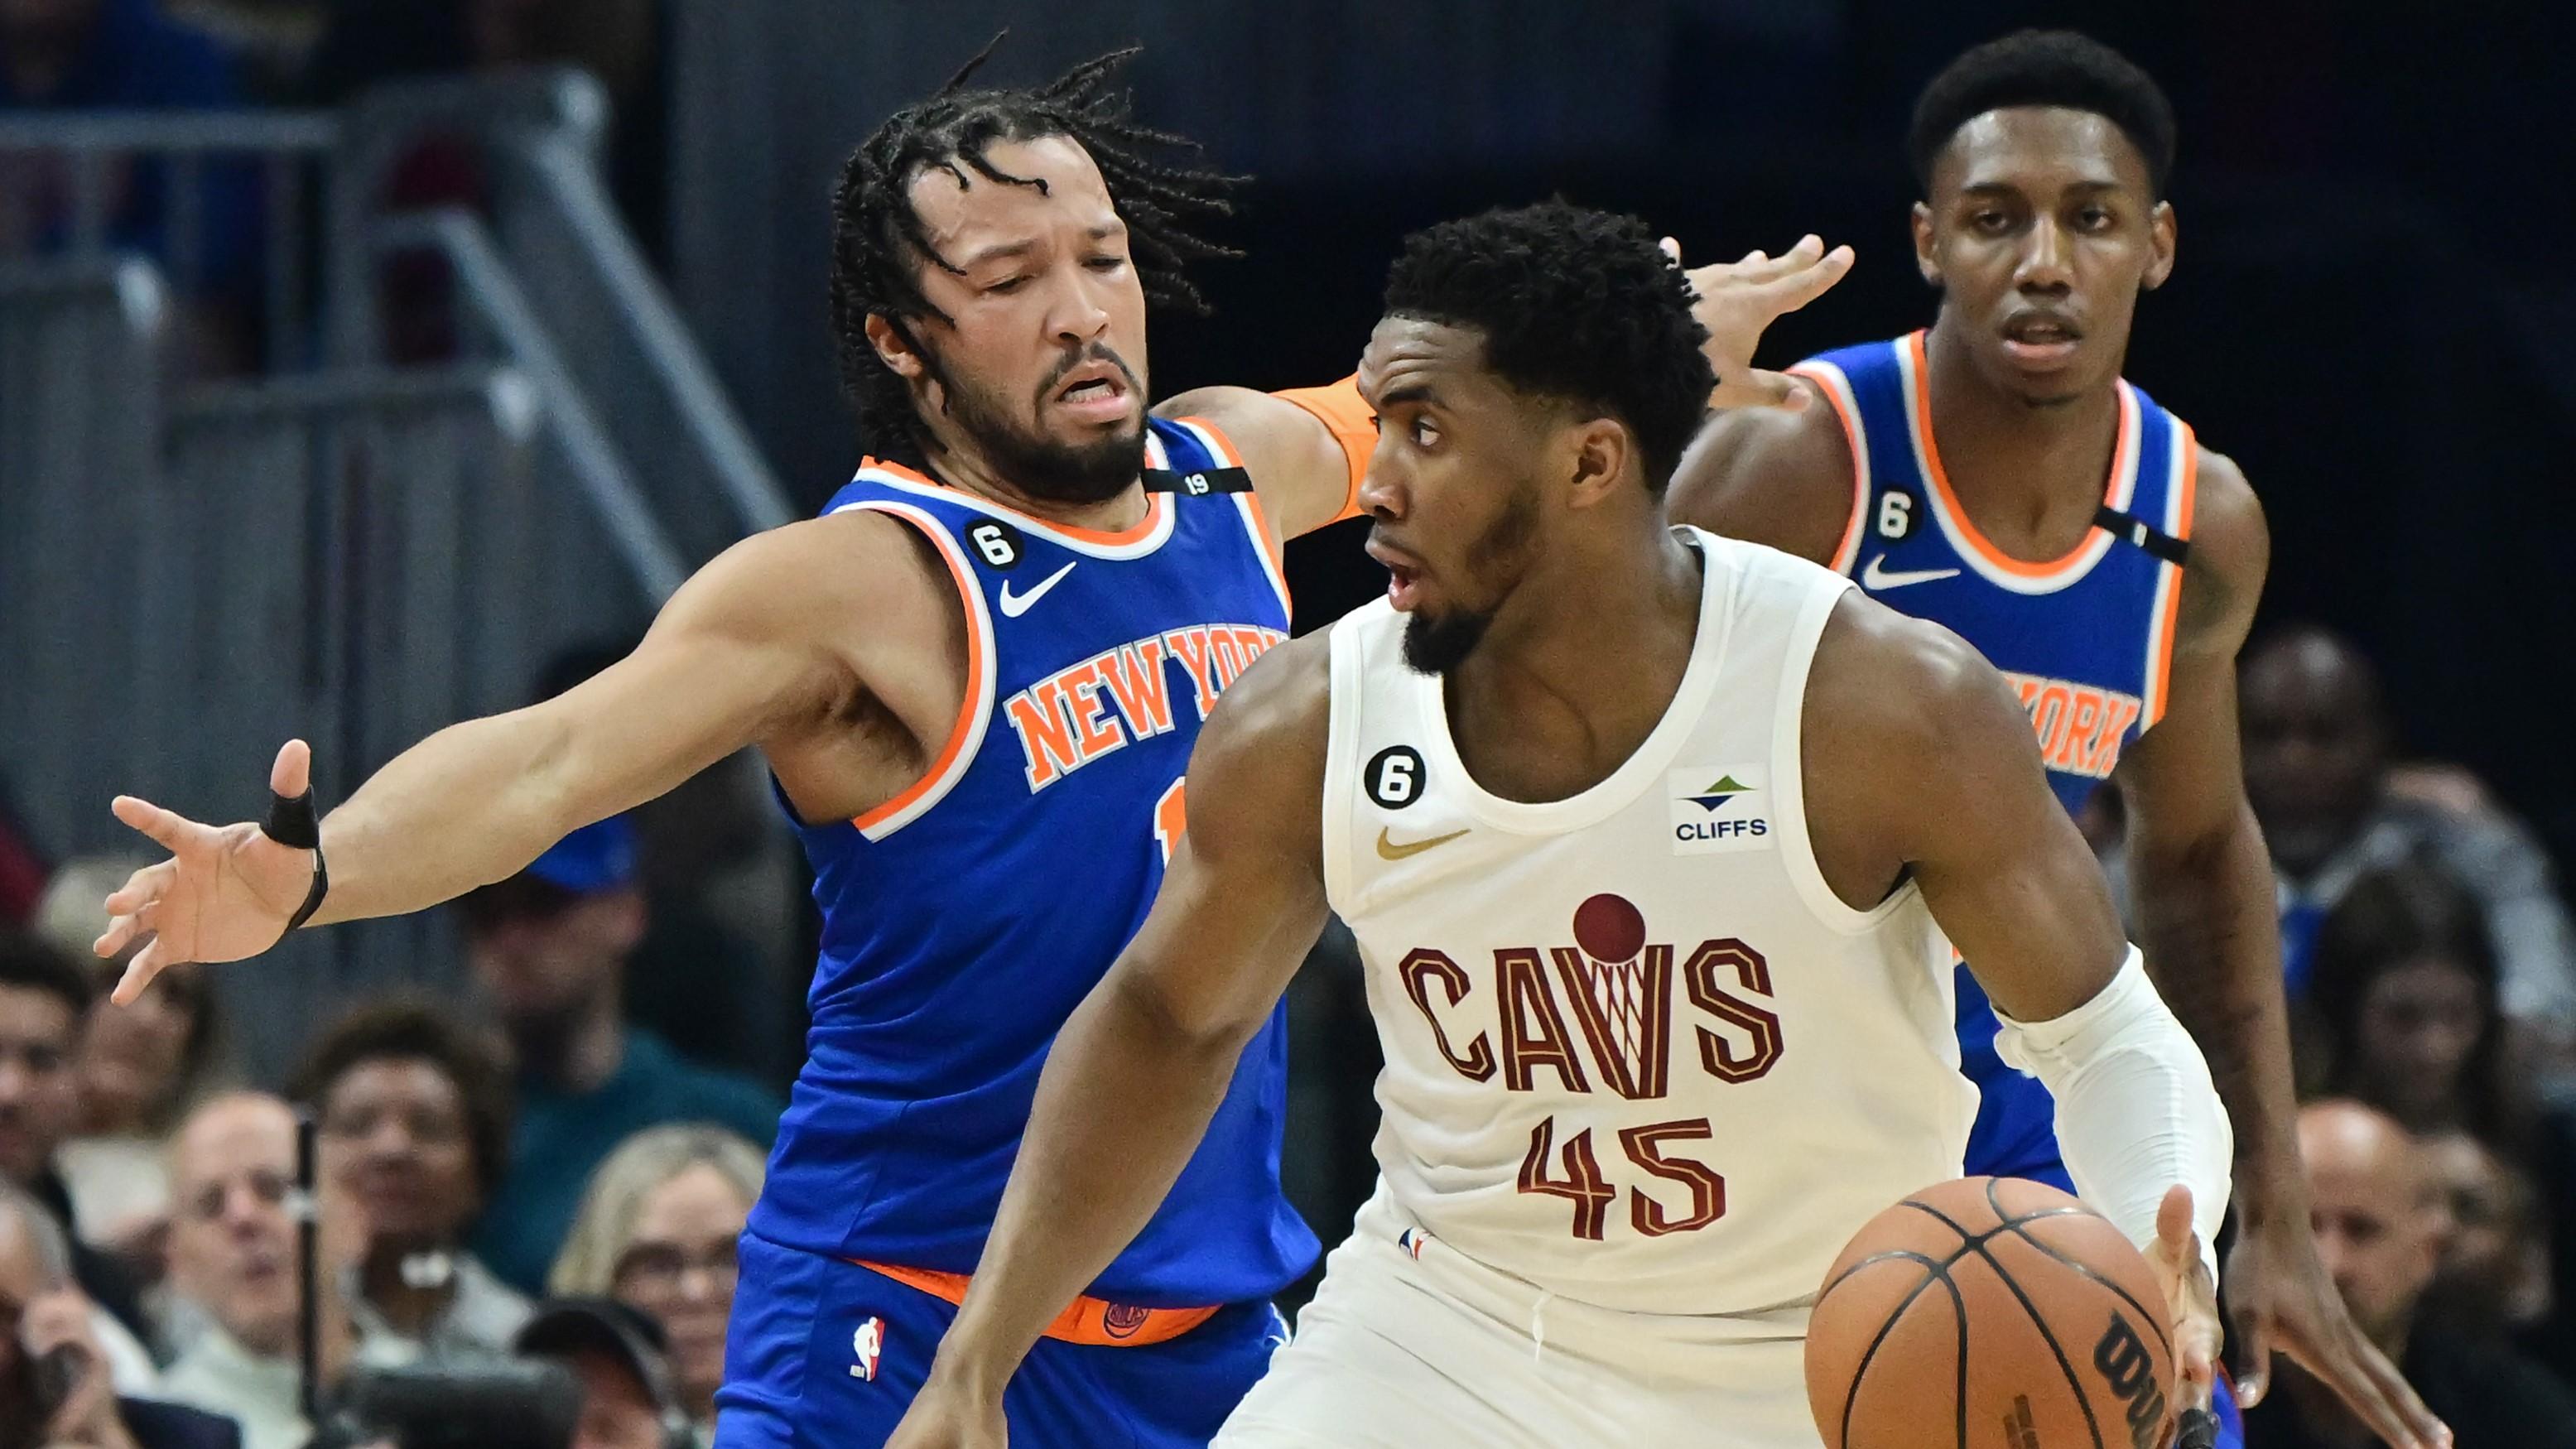 Mar 31, 2023; Cleveland, Ohio, USA; Cleveland Cavaliers guard Donovan Mitchell (45) is defended by New York Knicks guard Jalen Brunson (11) during the first half at Rocket Mortgage FieldHouse. Mandatory Credit: Ken Blaze-USA TODAY Sports / © Ken Blaze-USA TODAY Sports